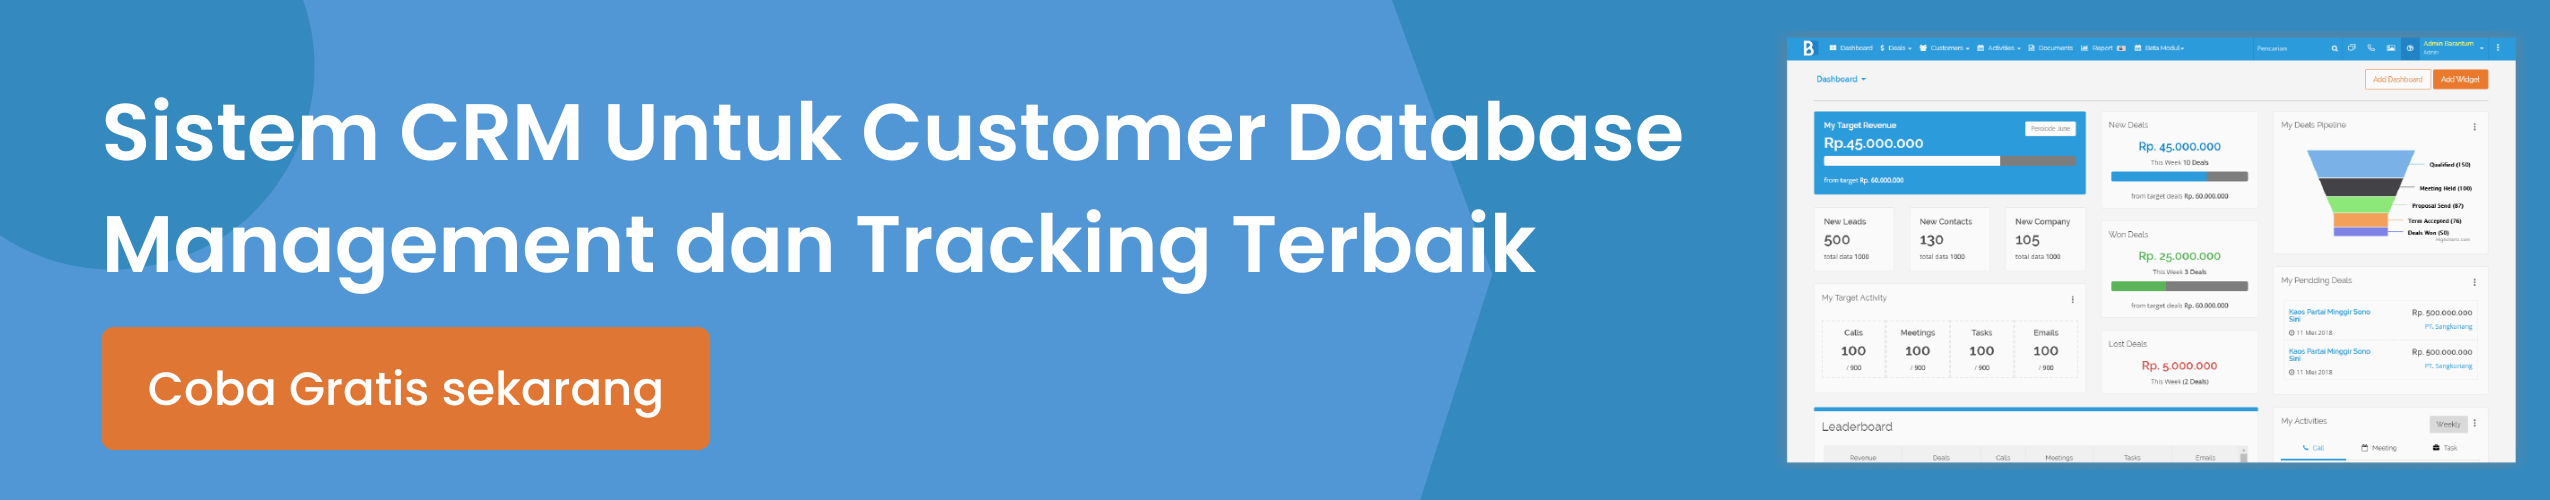 Client and Customer Database Management Terbaik